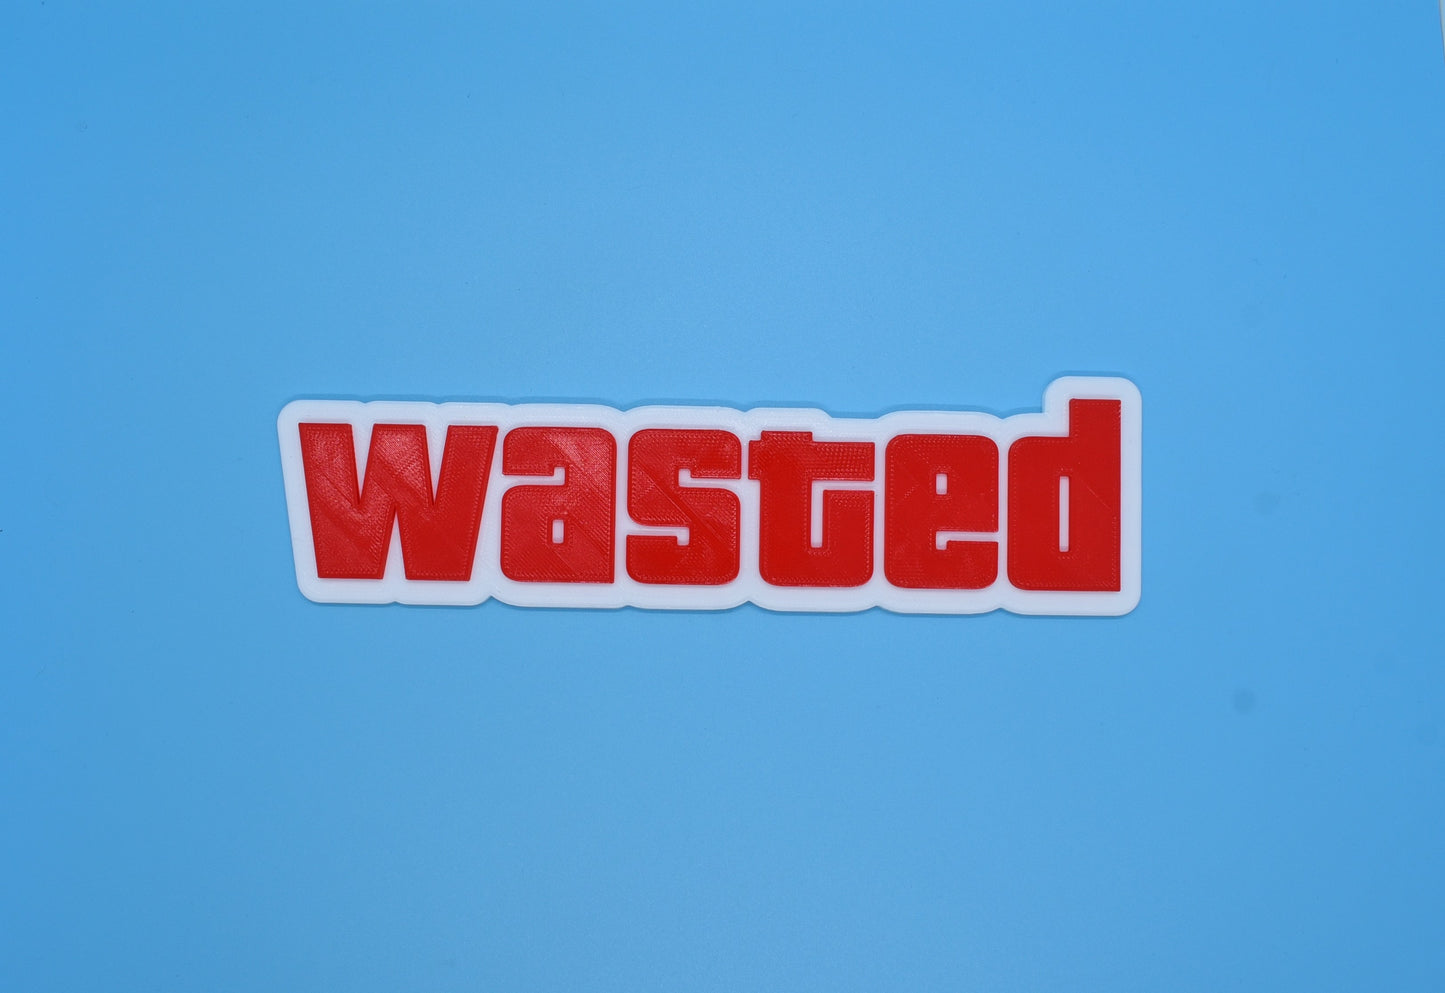 WASTED GTA - 3D printed sign